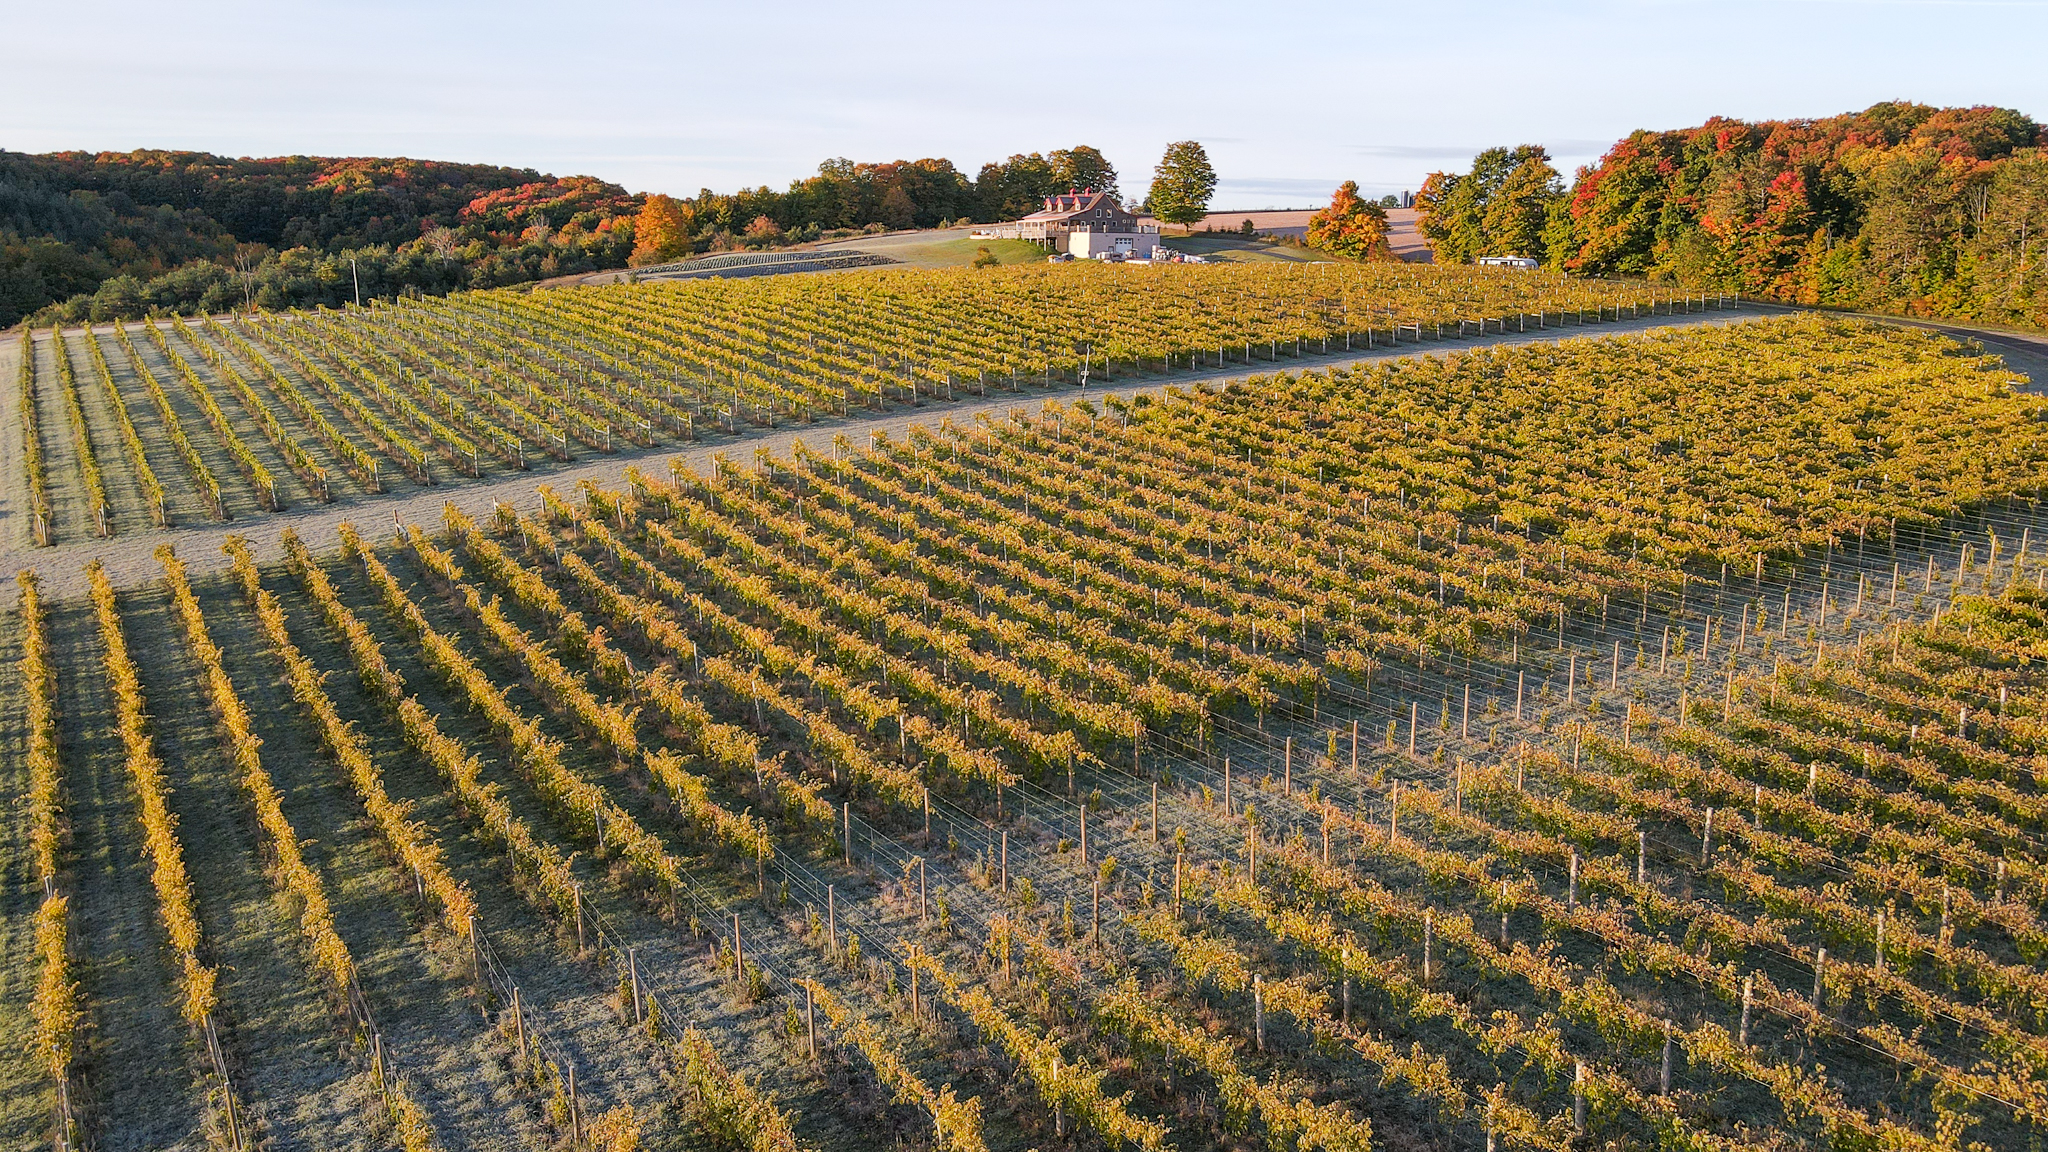 A drone photo of the vineyard and winery in the fall.